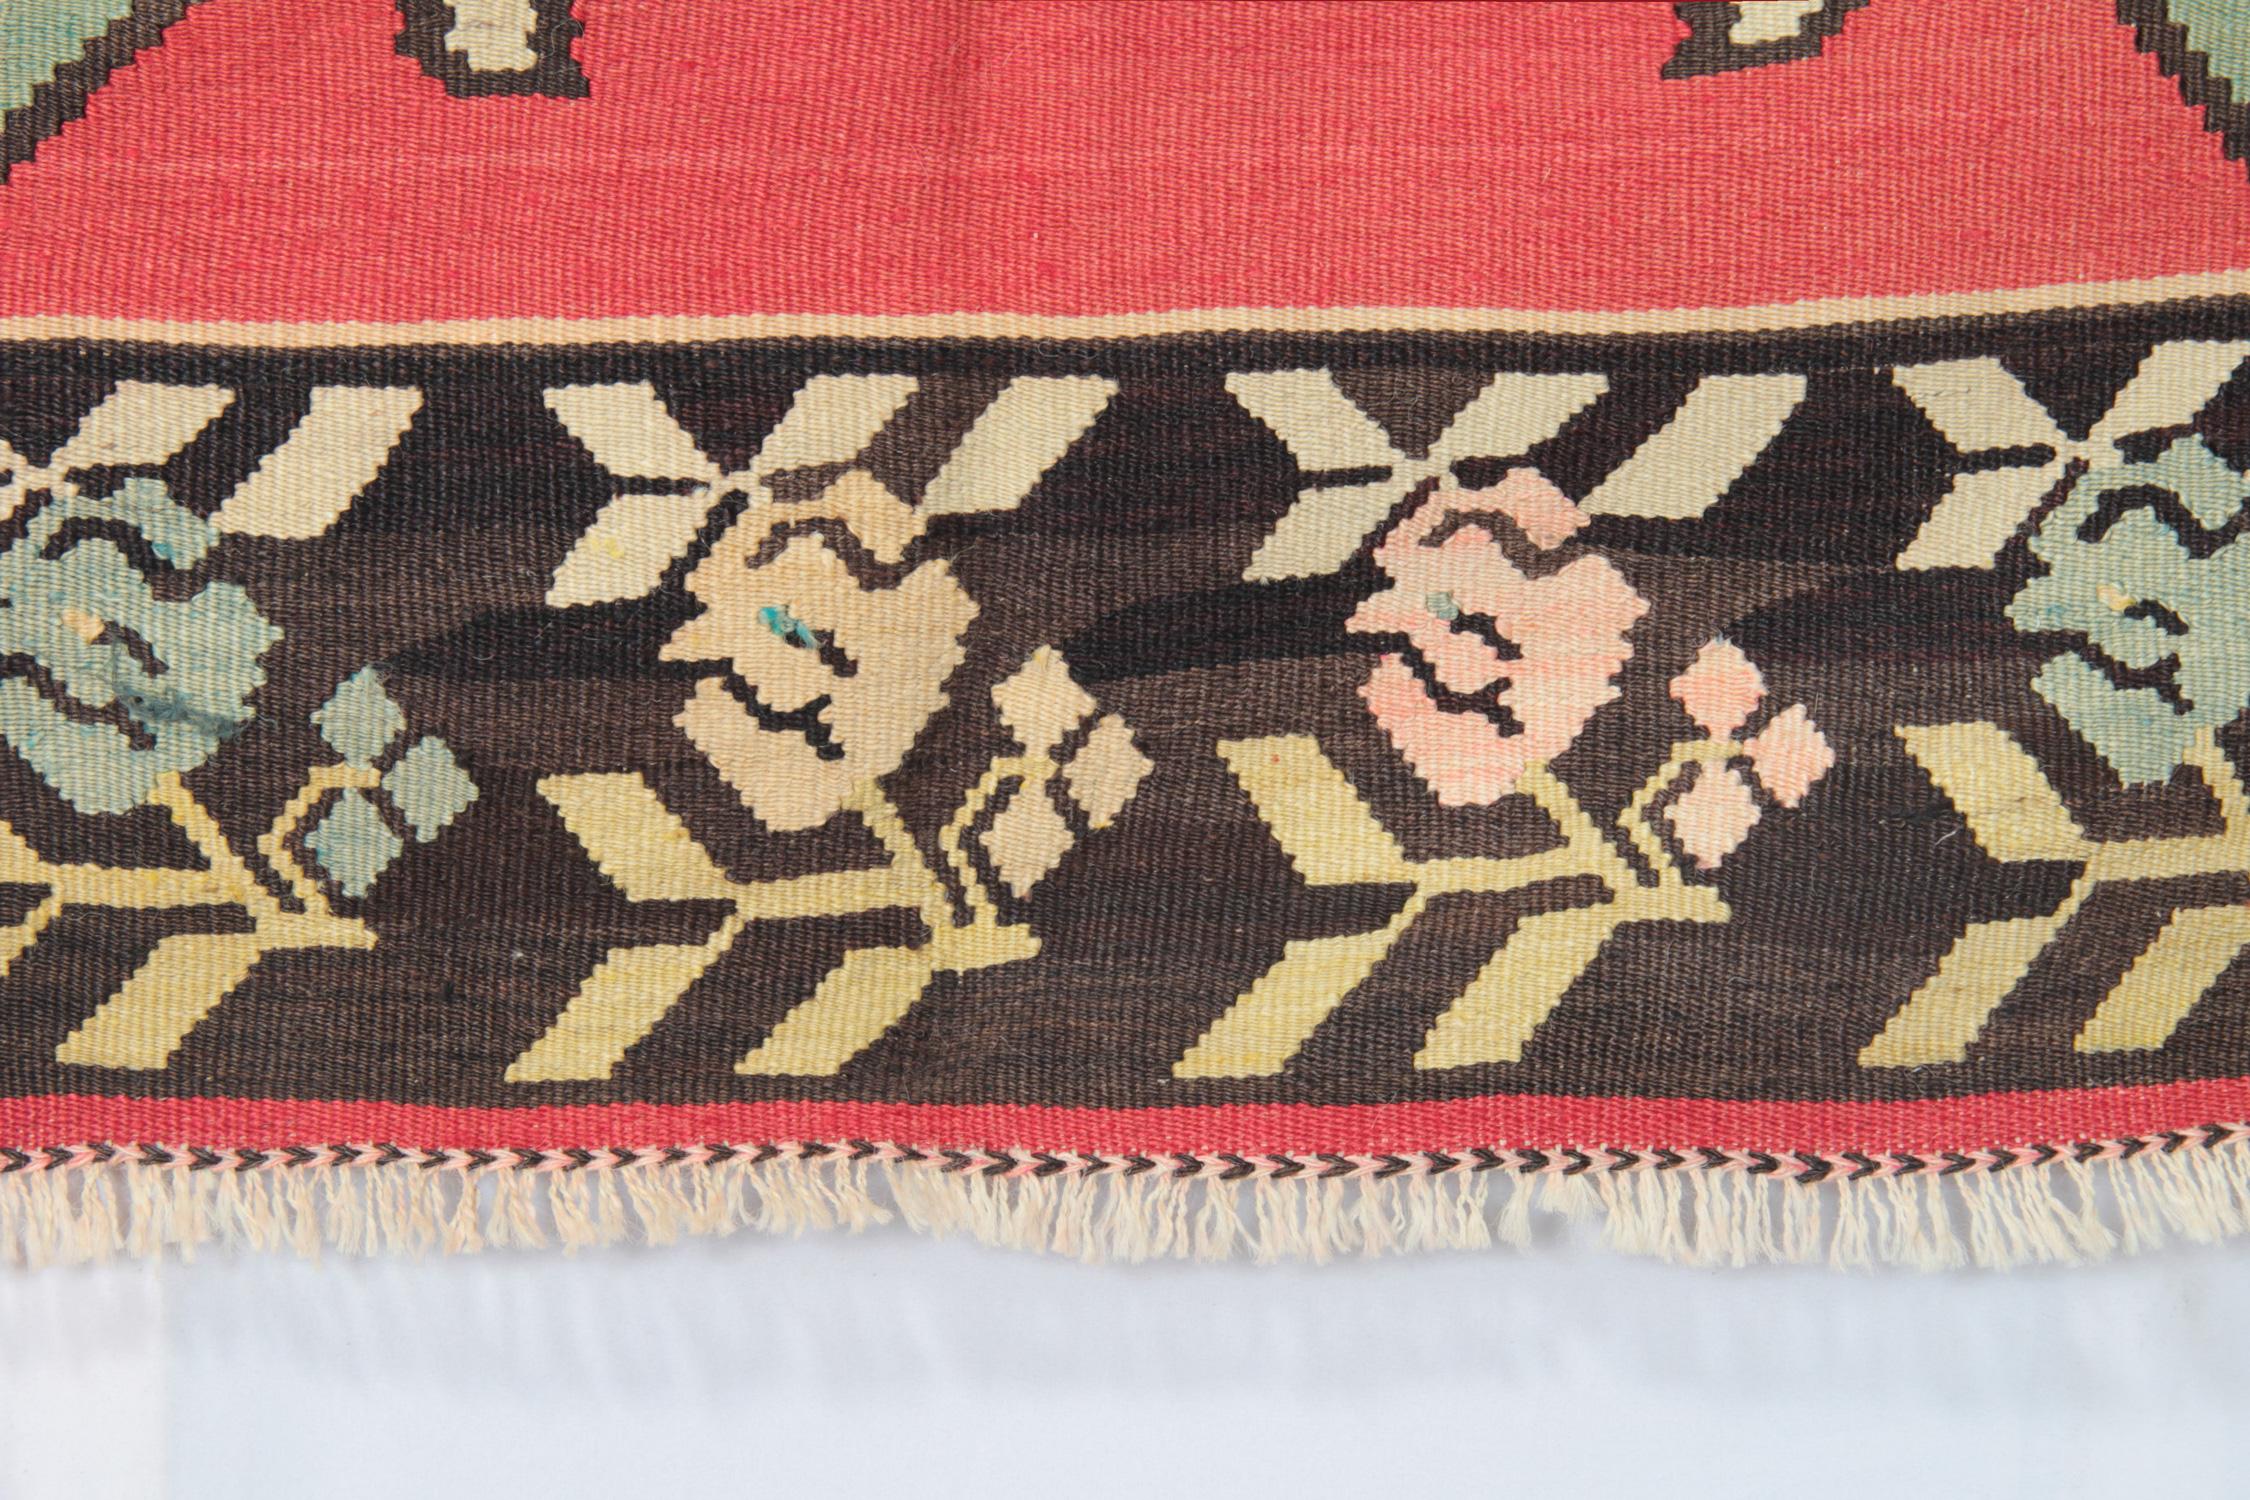 Woven Primitive Antique Kilim Rugs, Traditional Red Rugs, Turkish Carpet from Anatolia